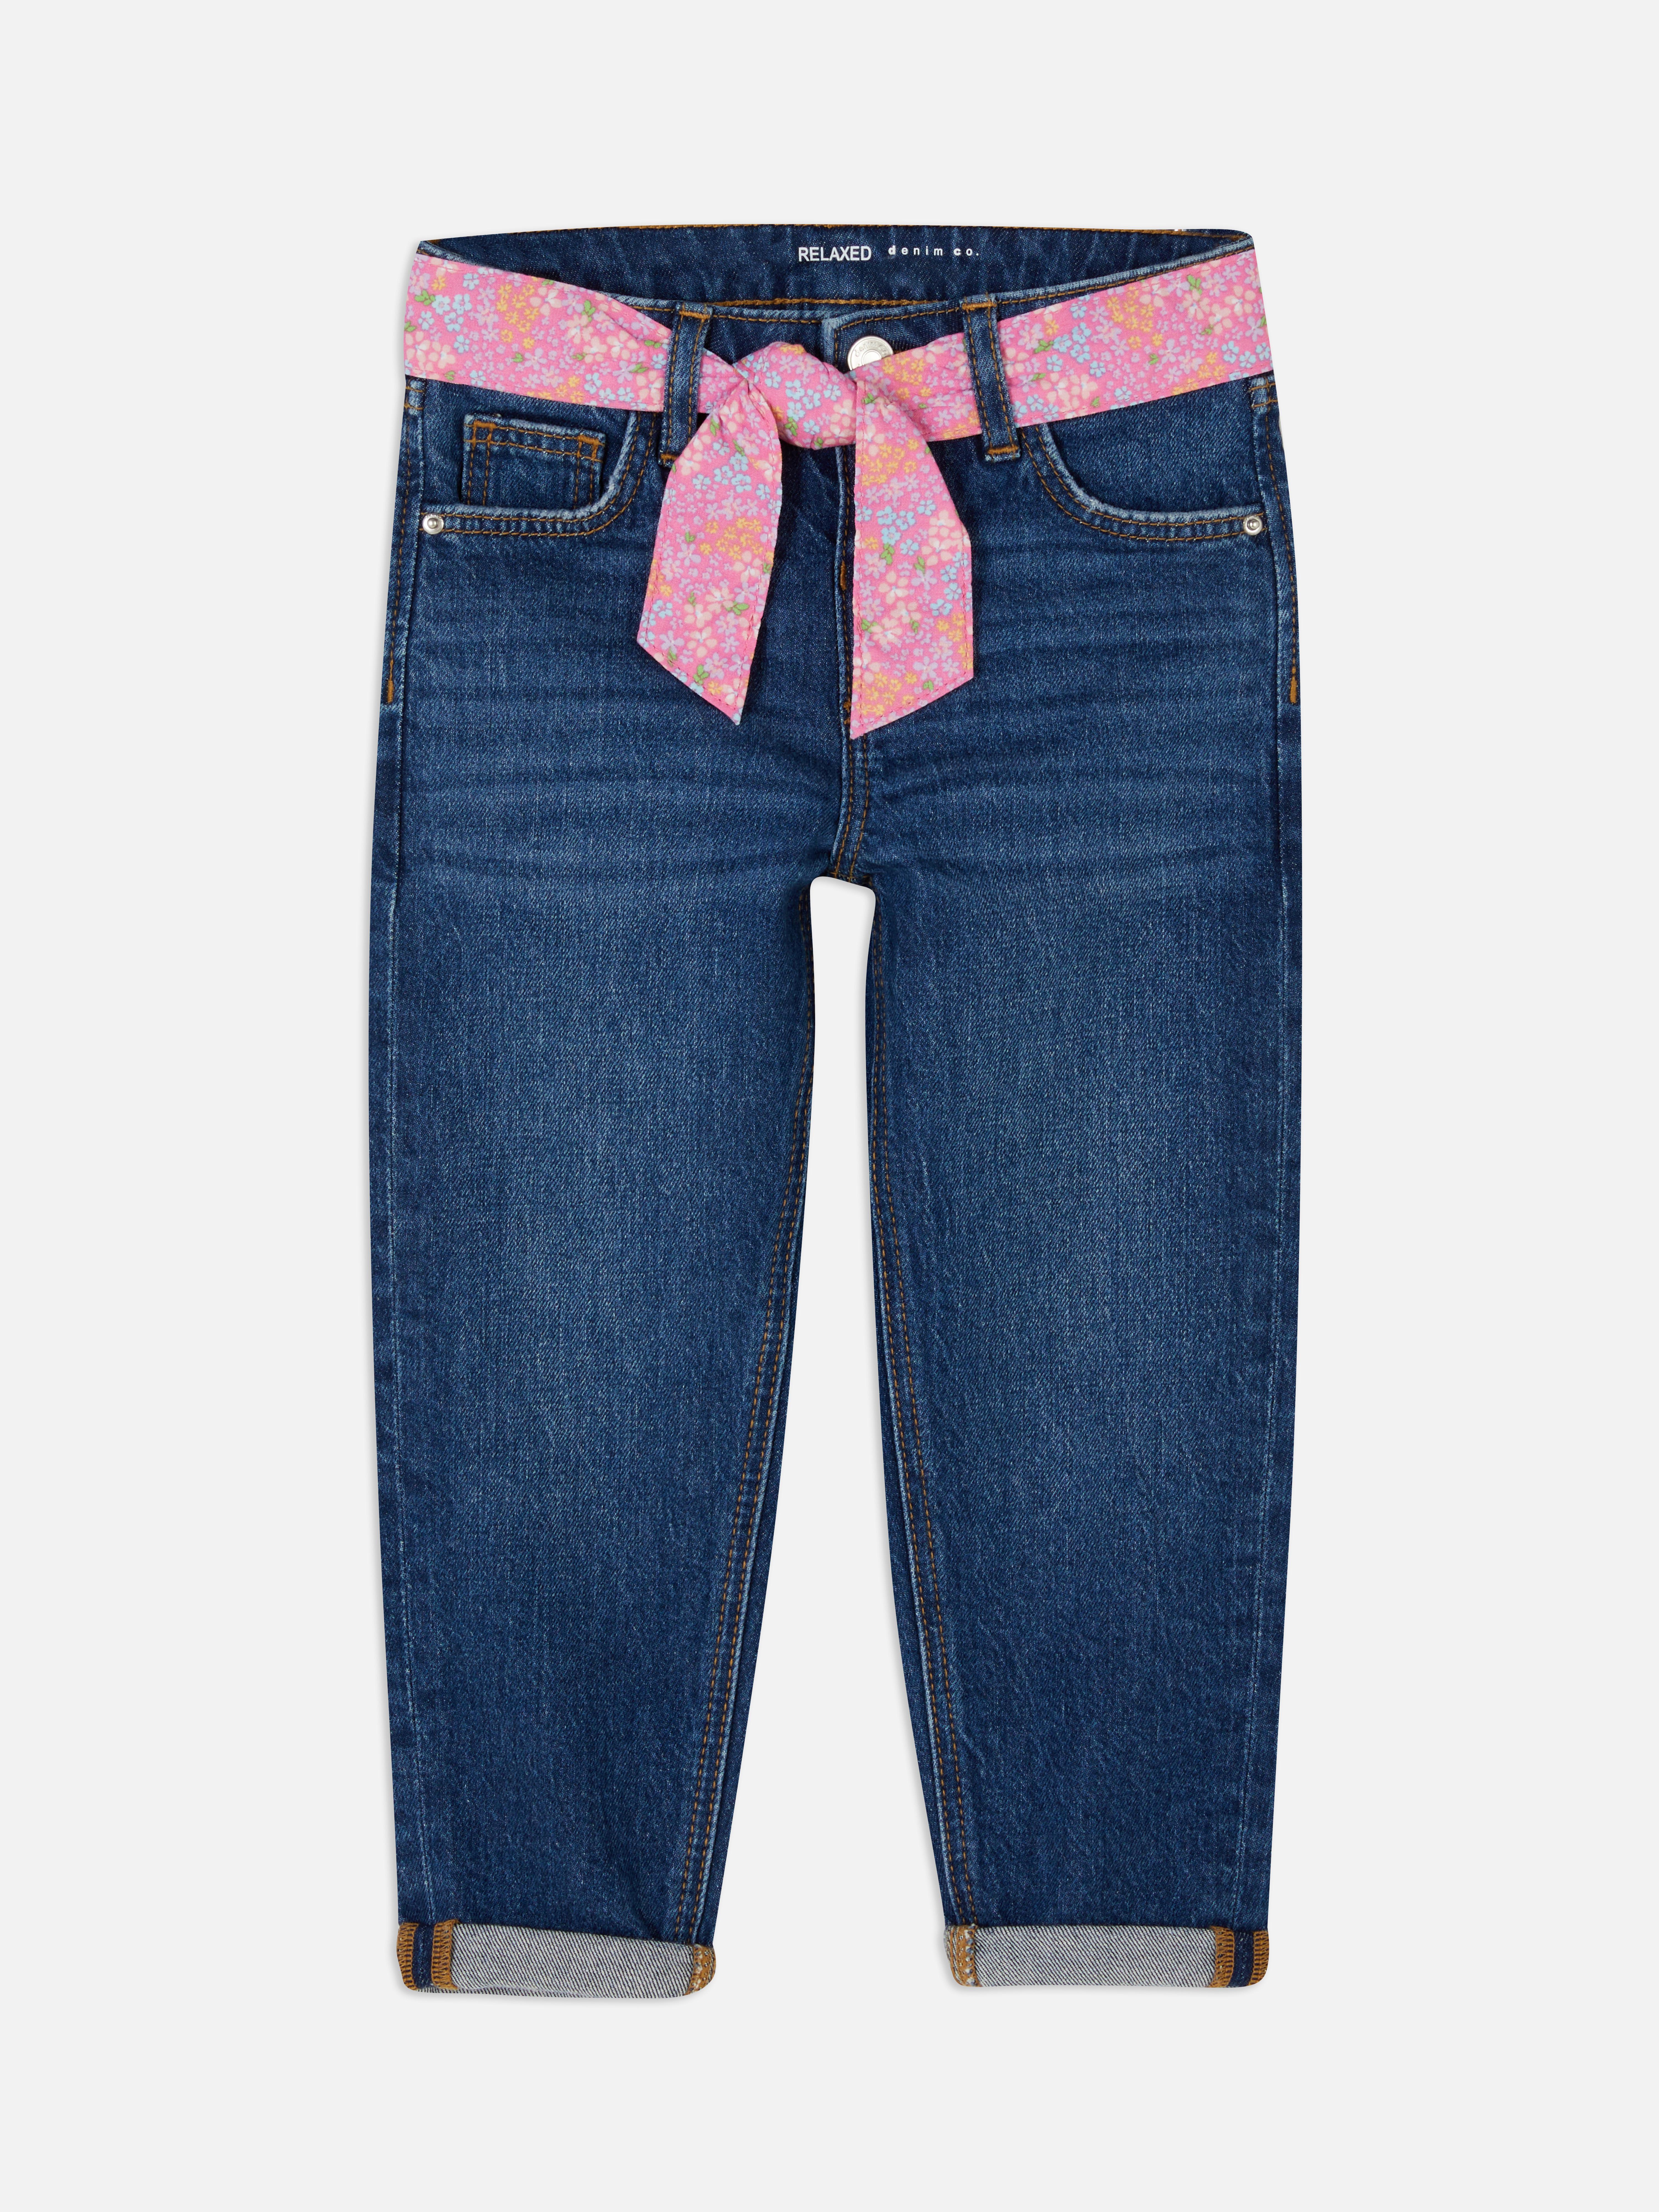 Belted jeans